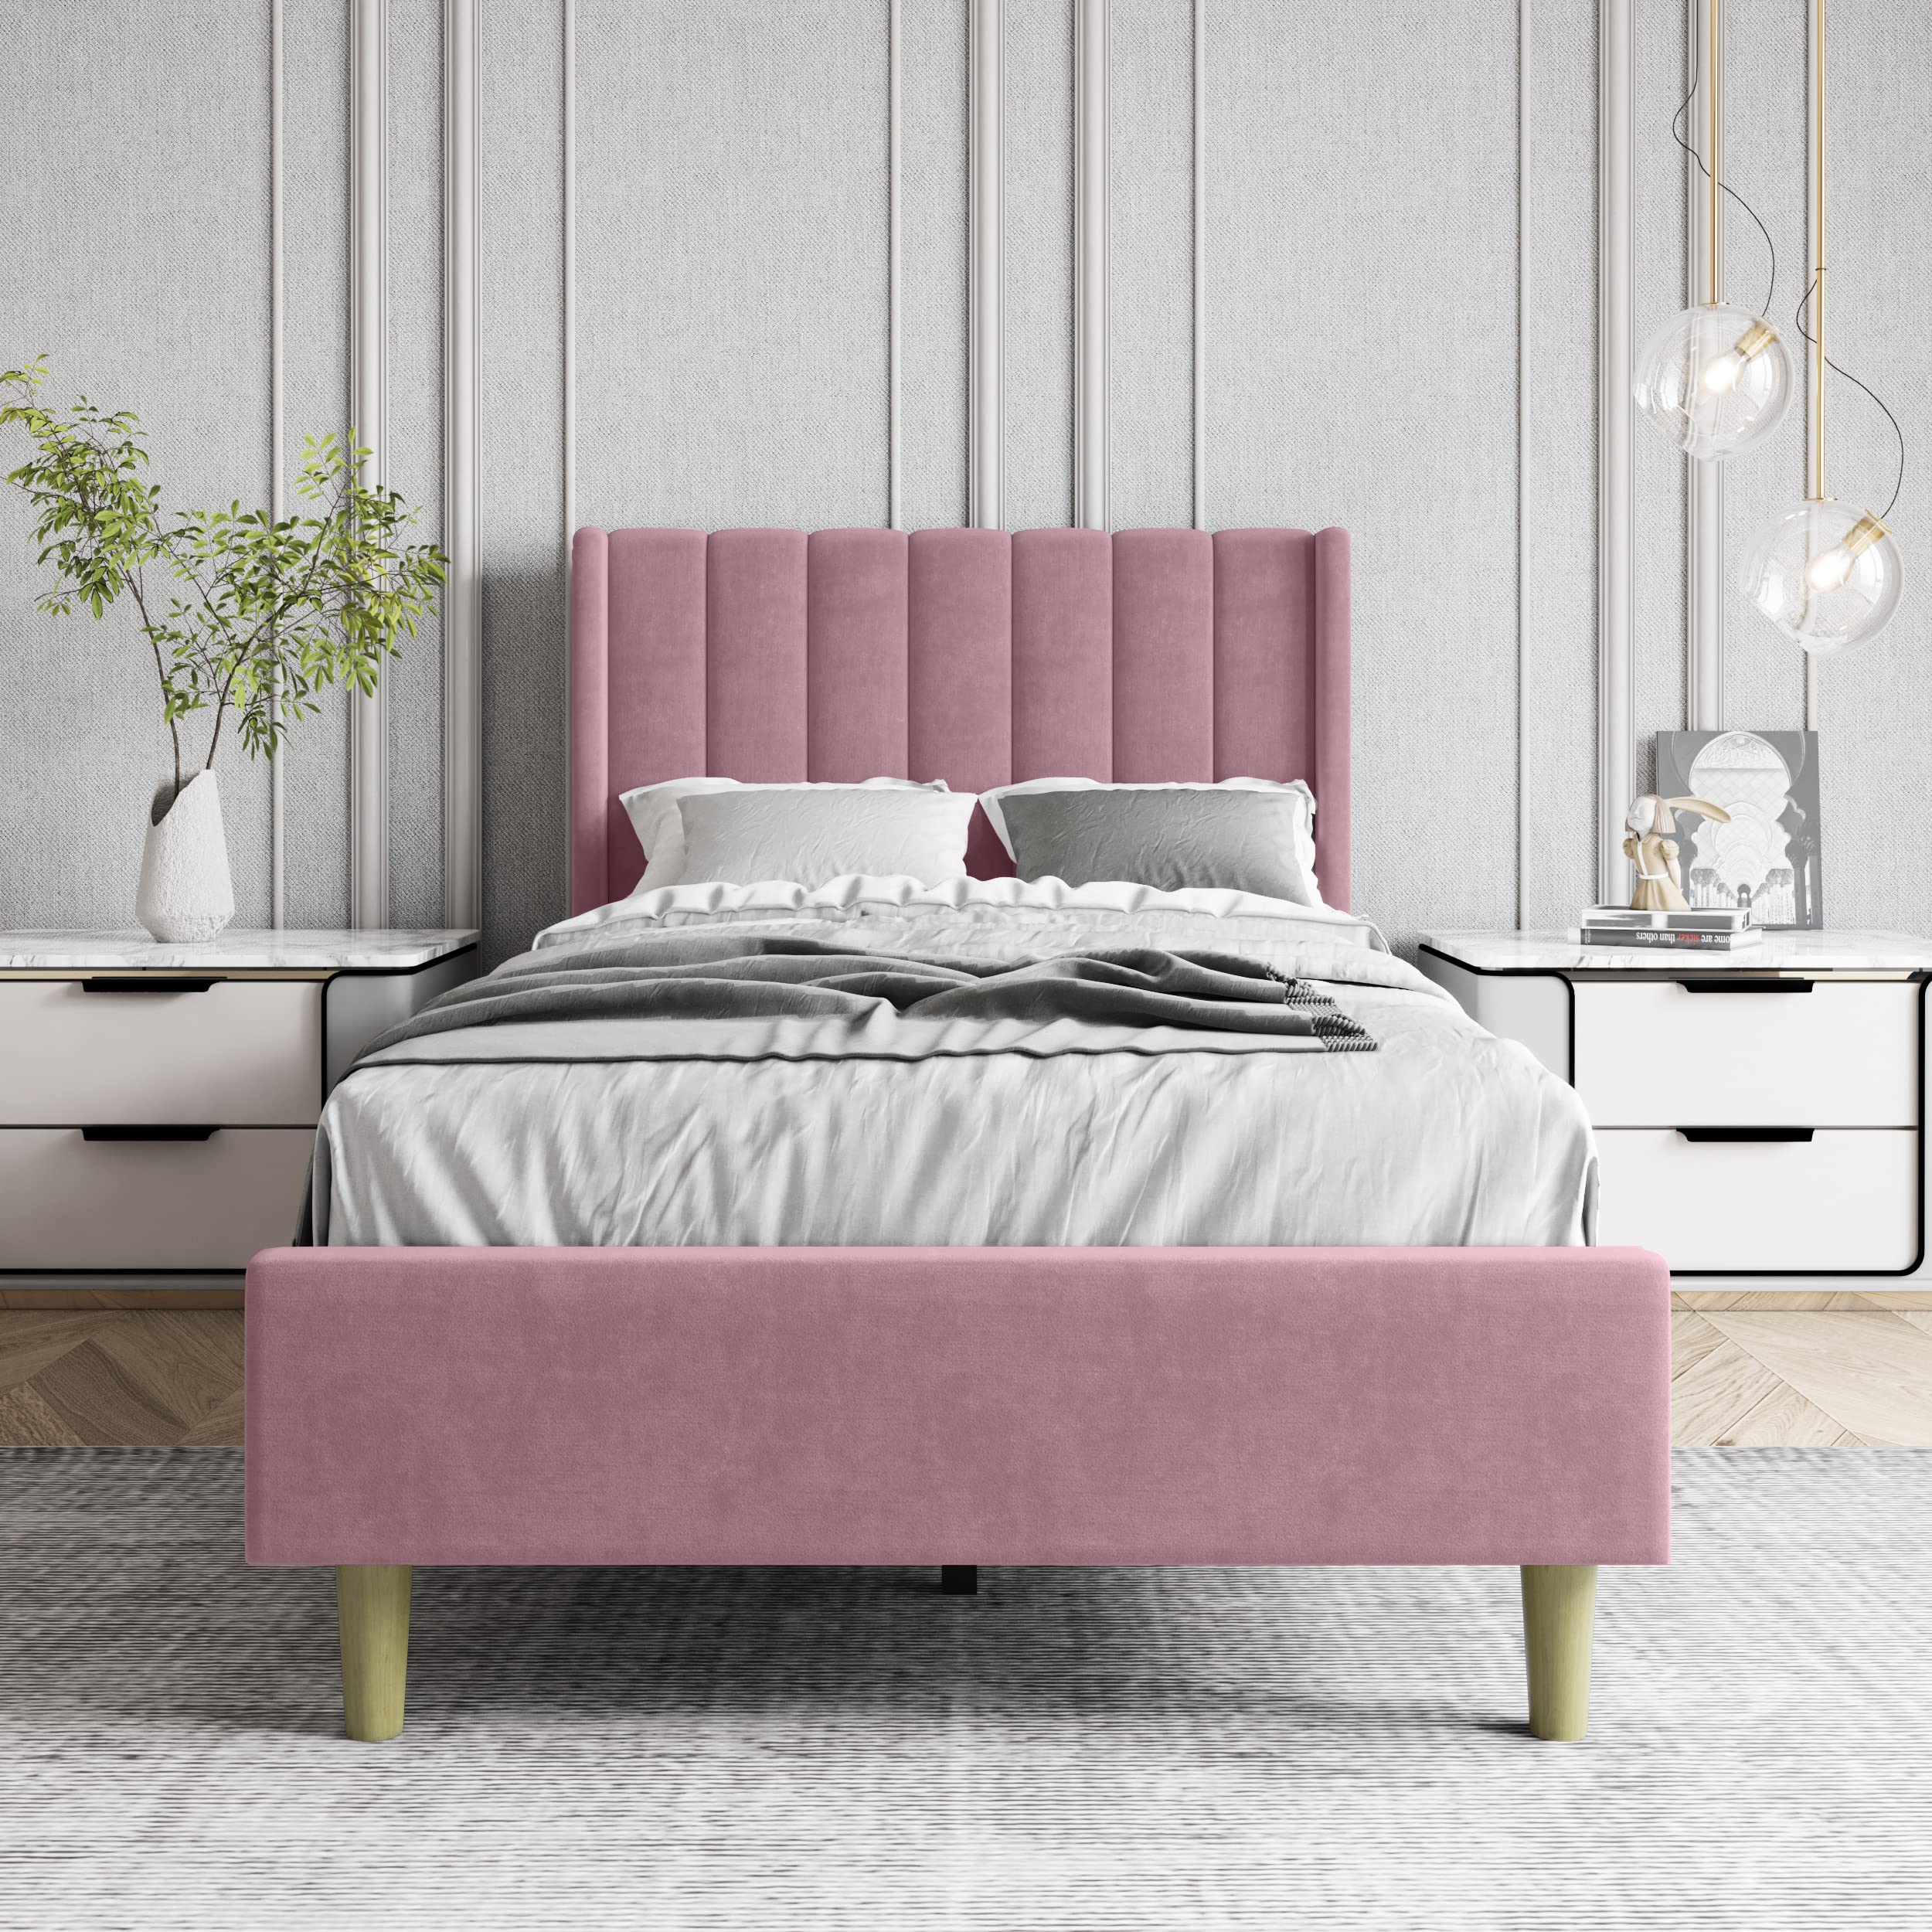 Zoophyter Upholstered Platform Bed Frame Twin Size with Headboard,Mattress Foundation/Strong Wooden Slats Support/No Box Spring Needed/Easy Assembly Pink